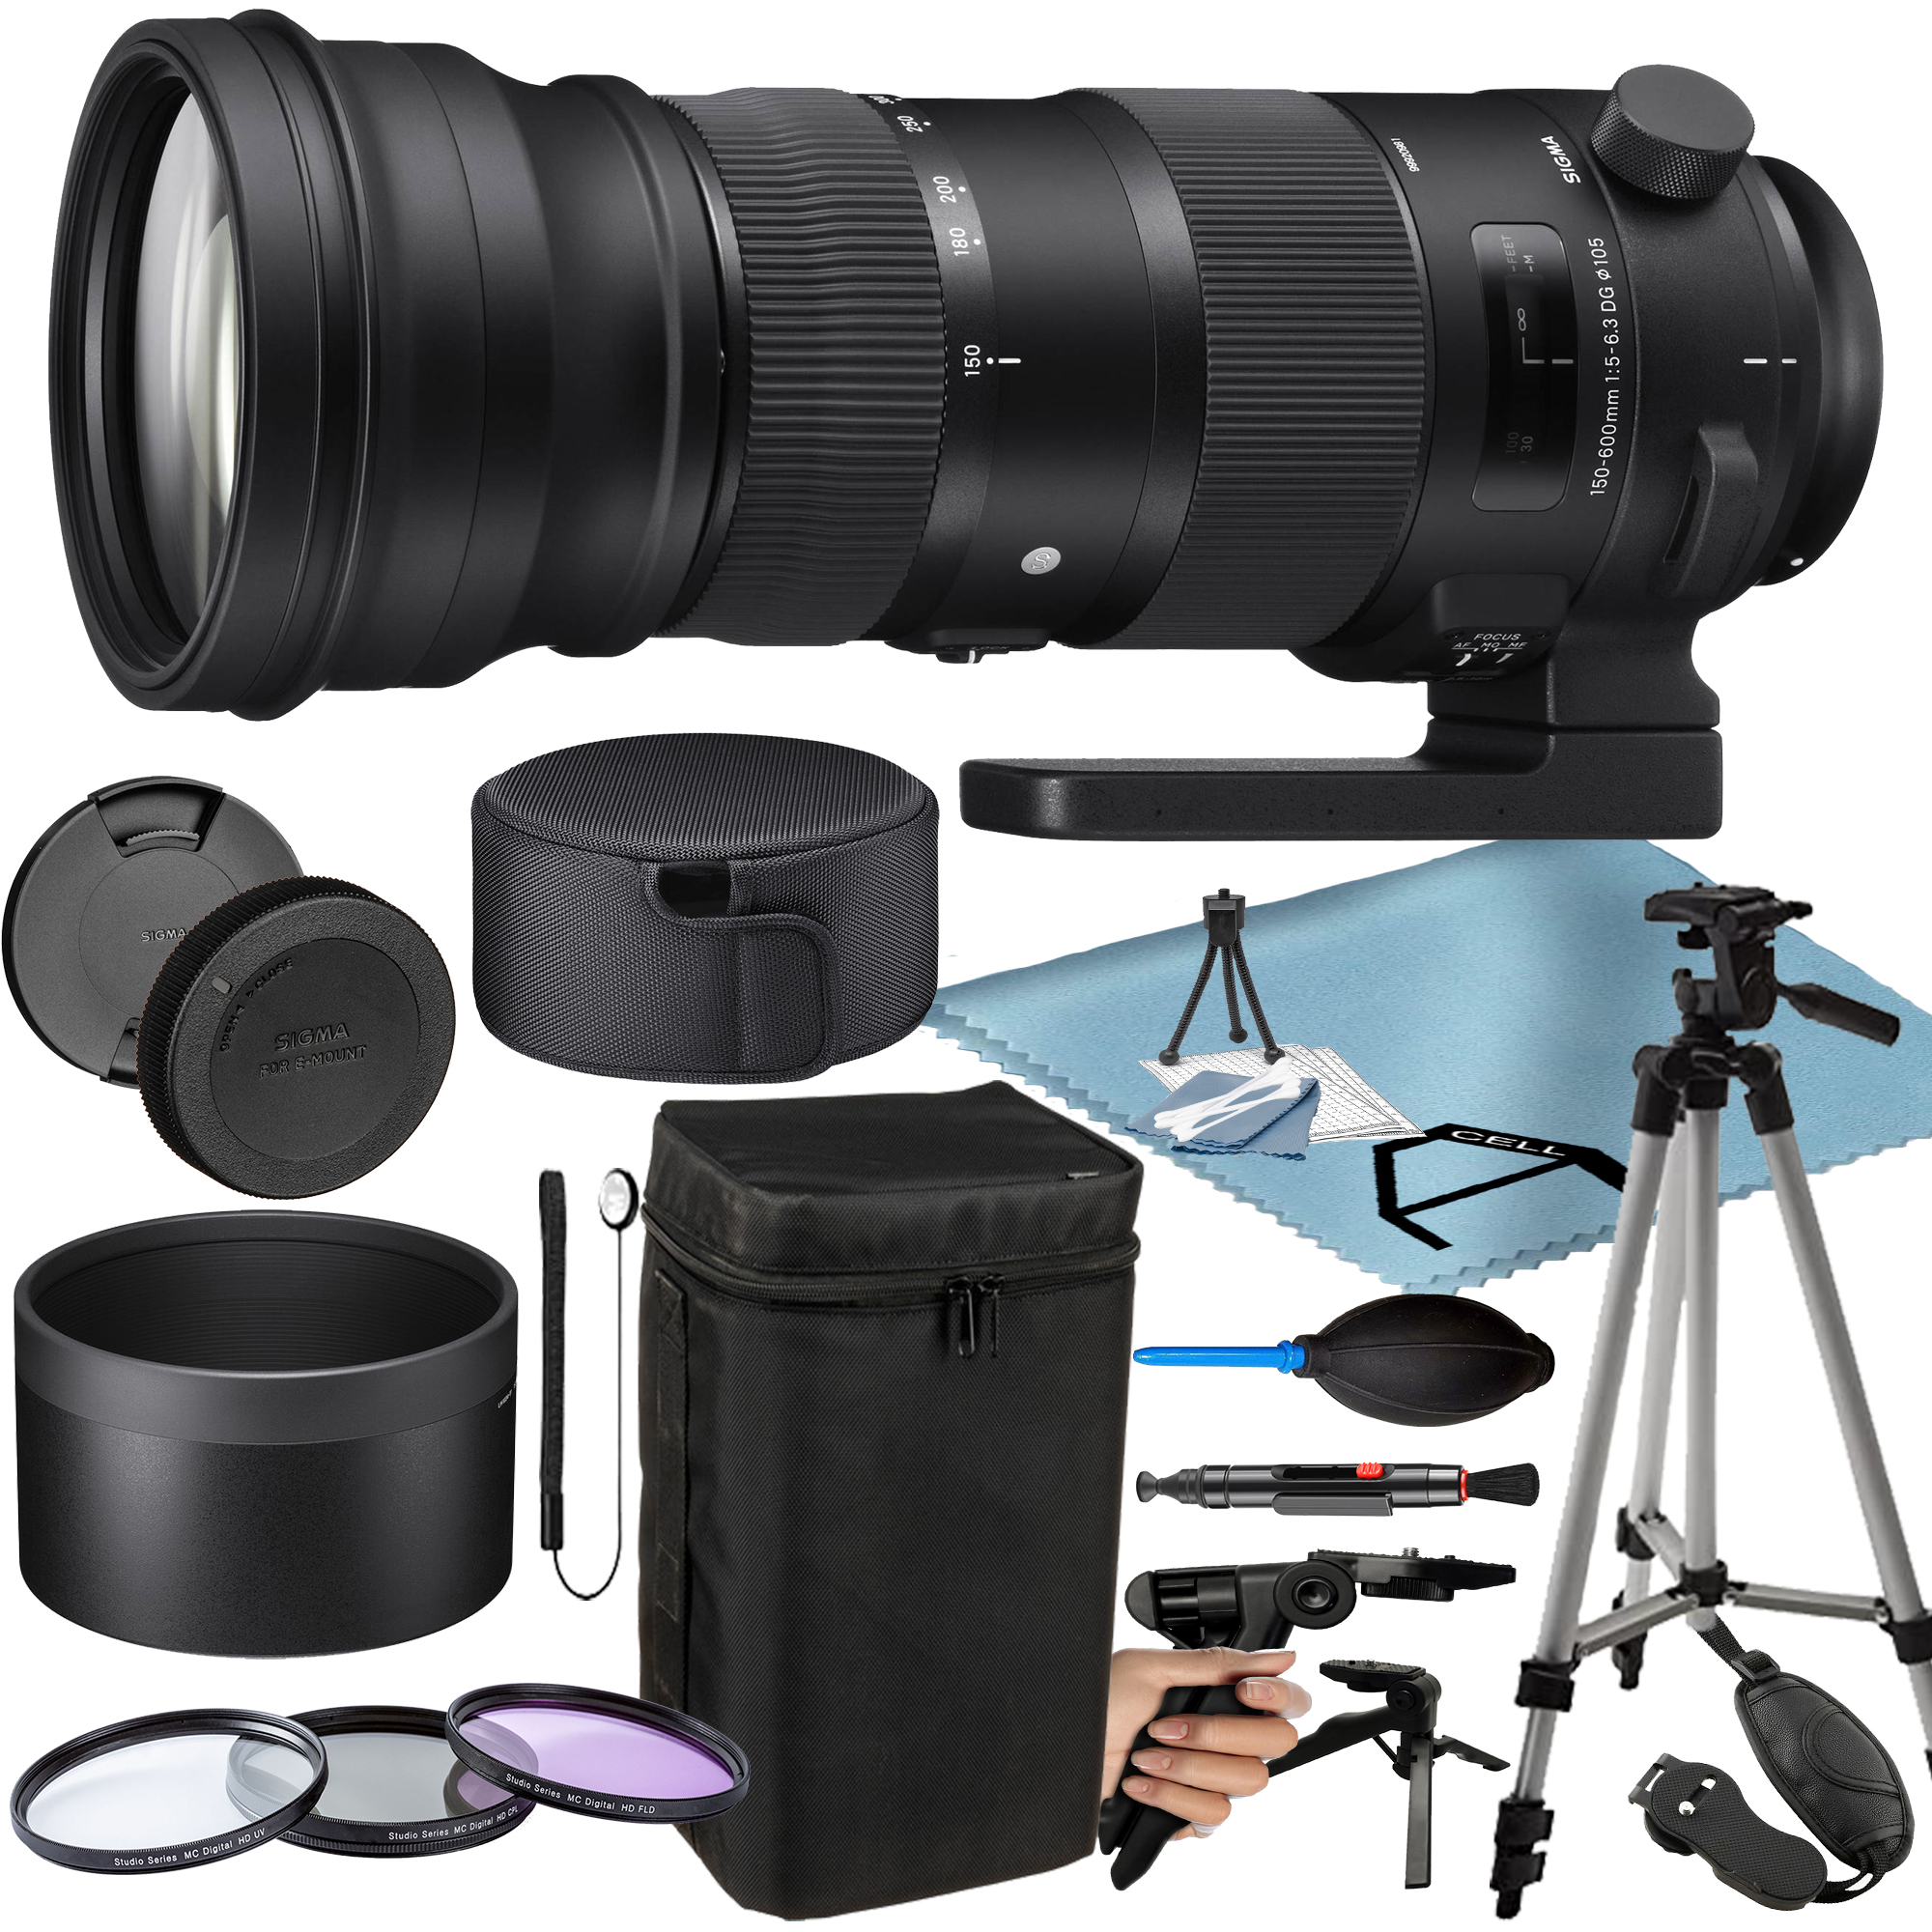 Sigma 150-600mm F/5-6.3 DG OS HSM Sports Lens for Nikon F with Tripod + 3 Pieces Filter + A-Cell Accessory Bundle